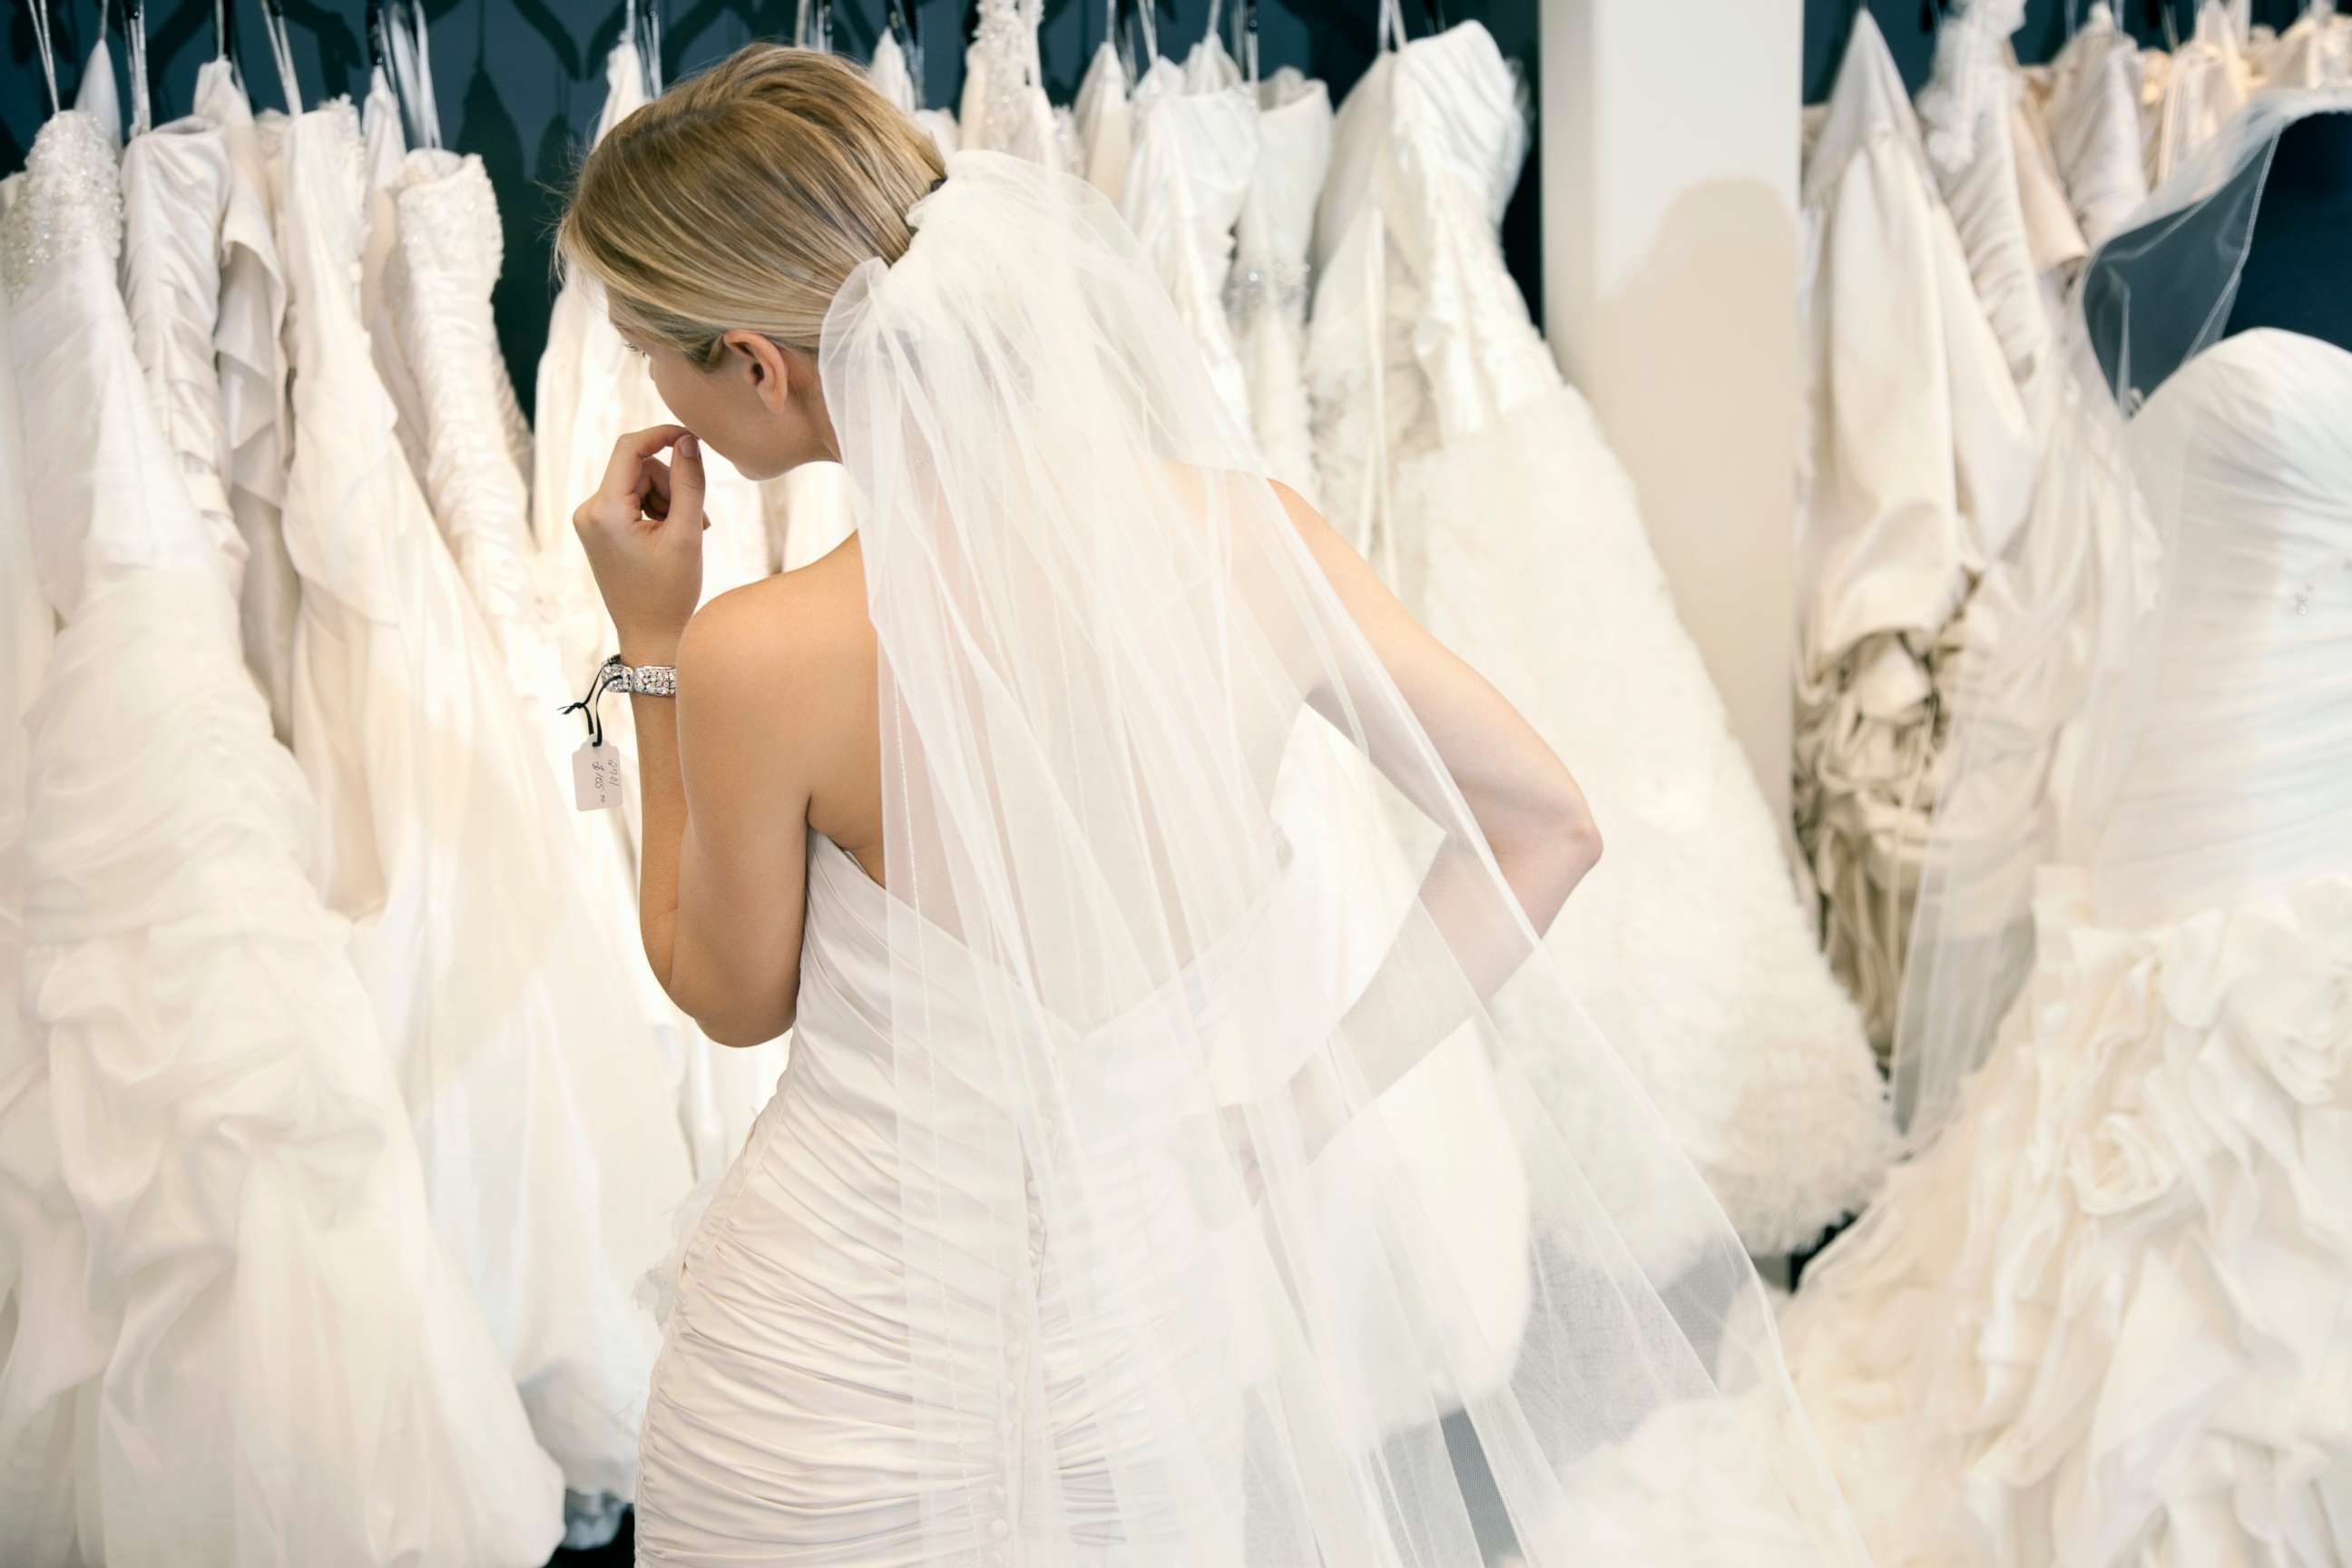 PHOTO: A woman looks at wedding dresses in this stock photo.